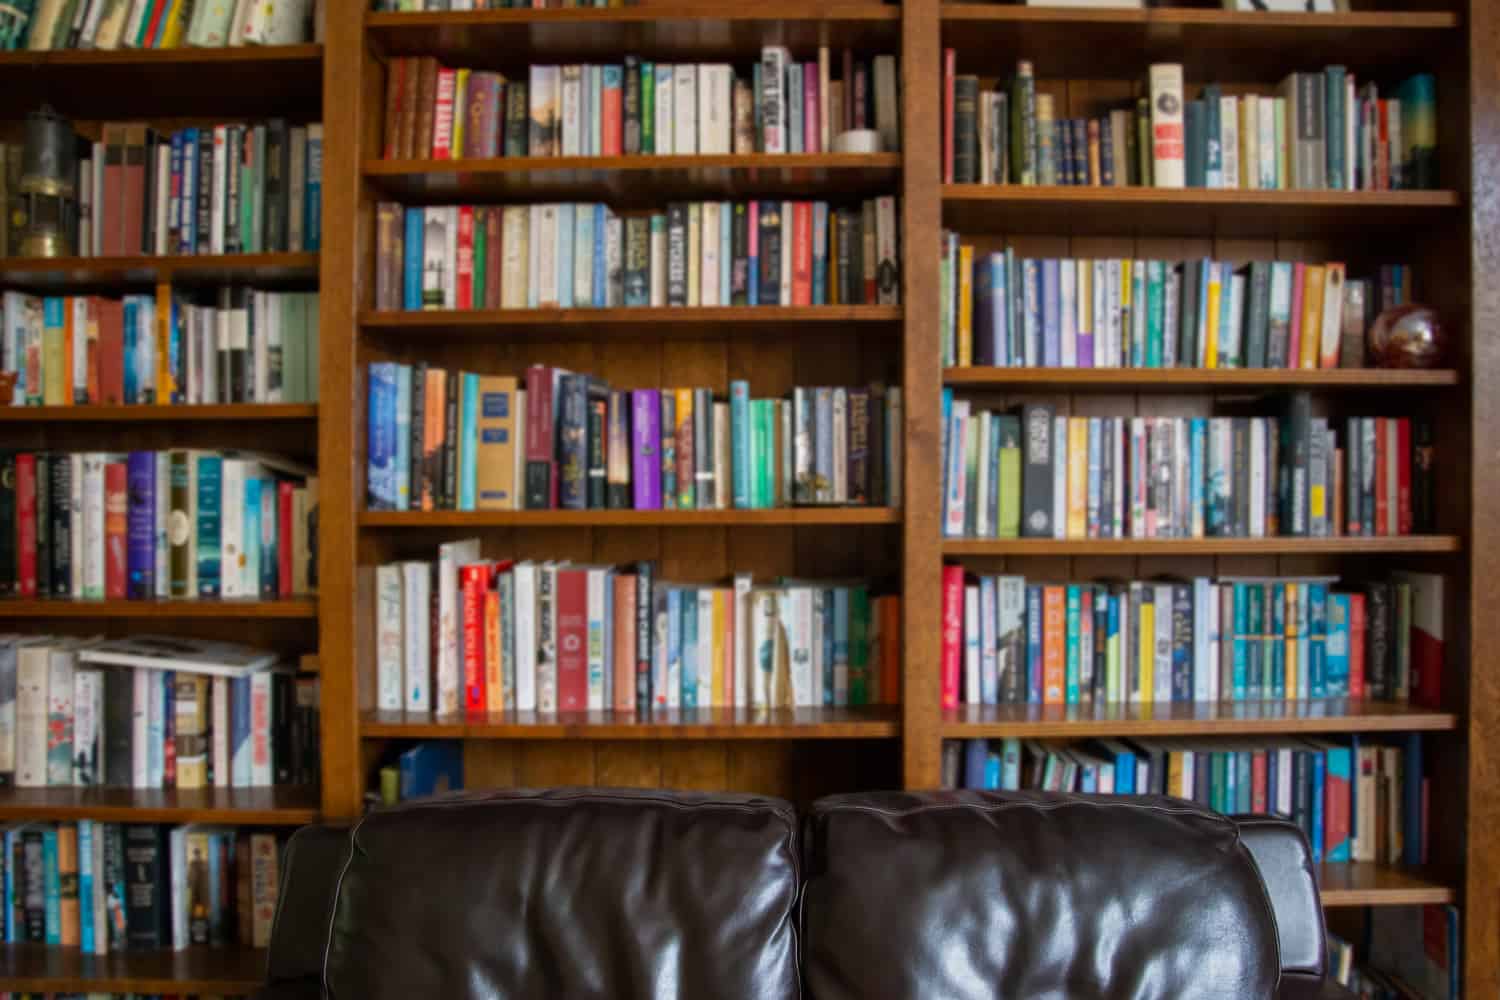 Wooden bookcase filled with blurred books, and a leather sofa in the foreground